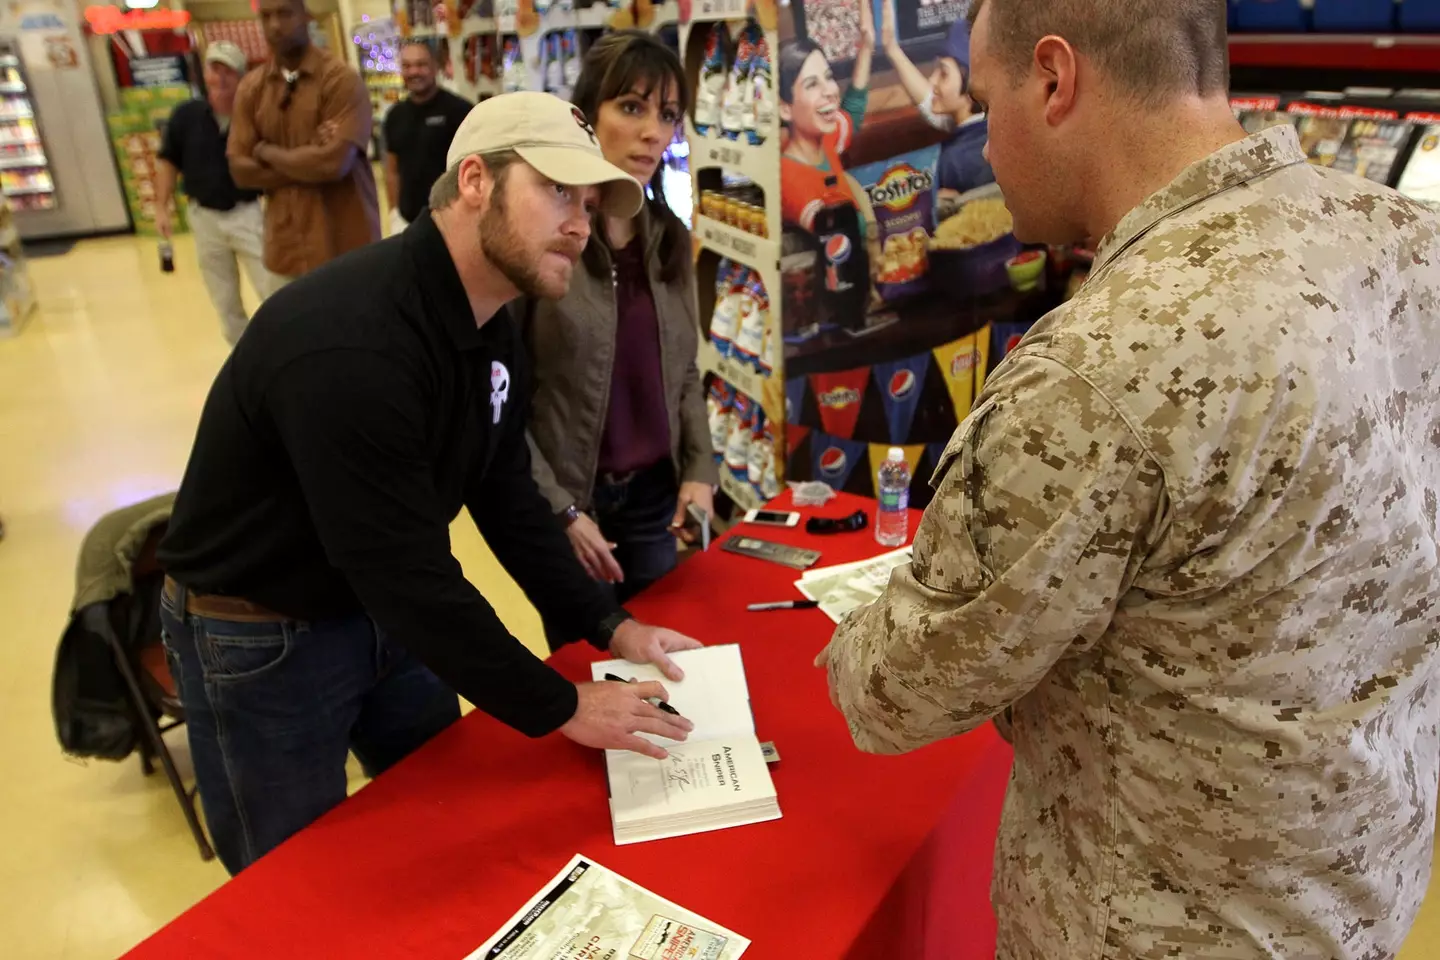 'American Sniper' Chris Kyle wrote a bestselling memoir which was made into a movie.